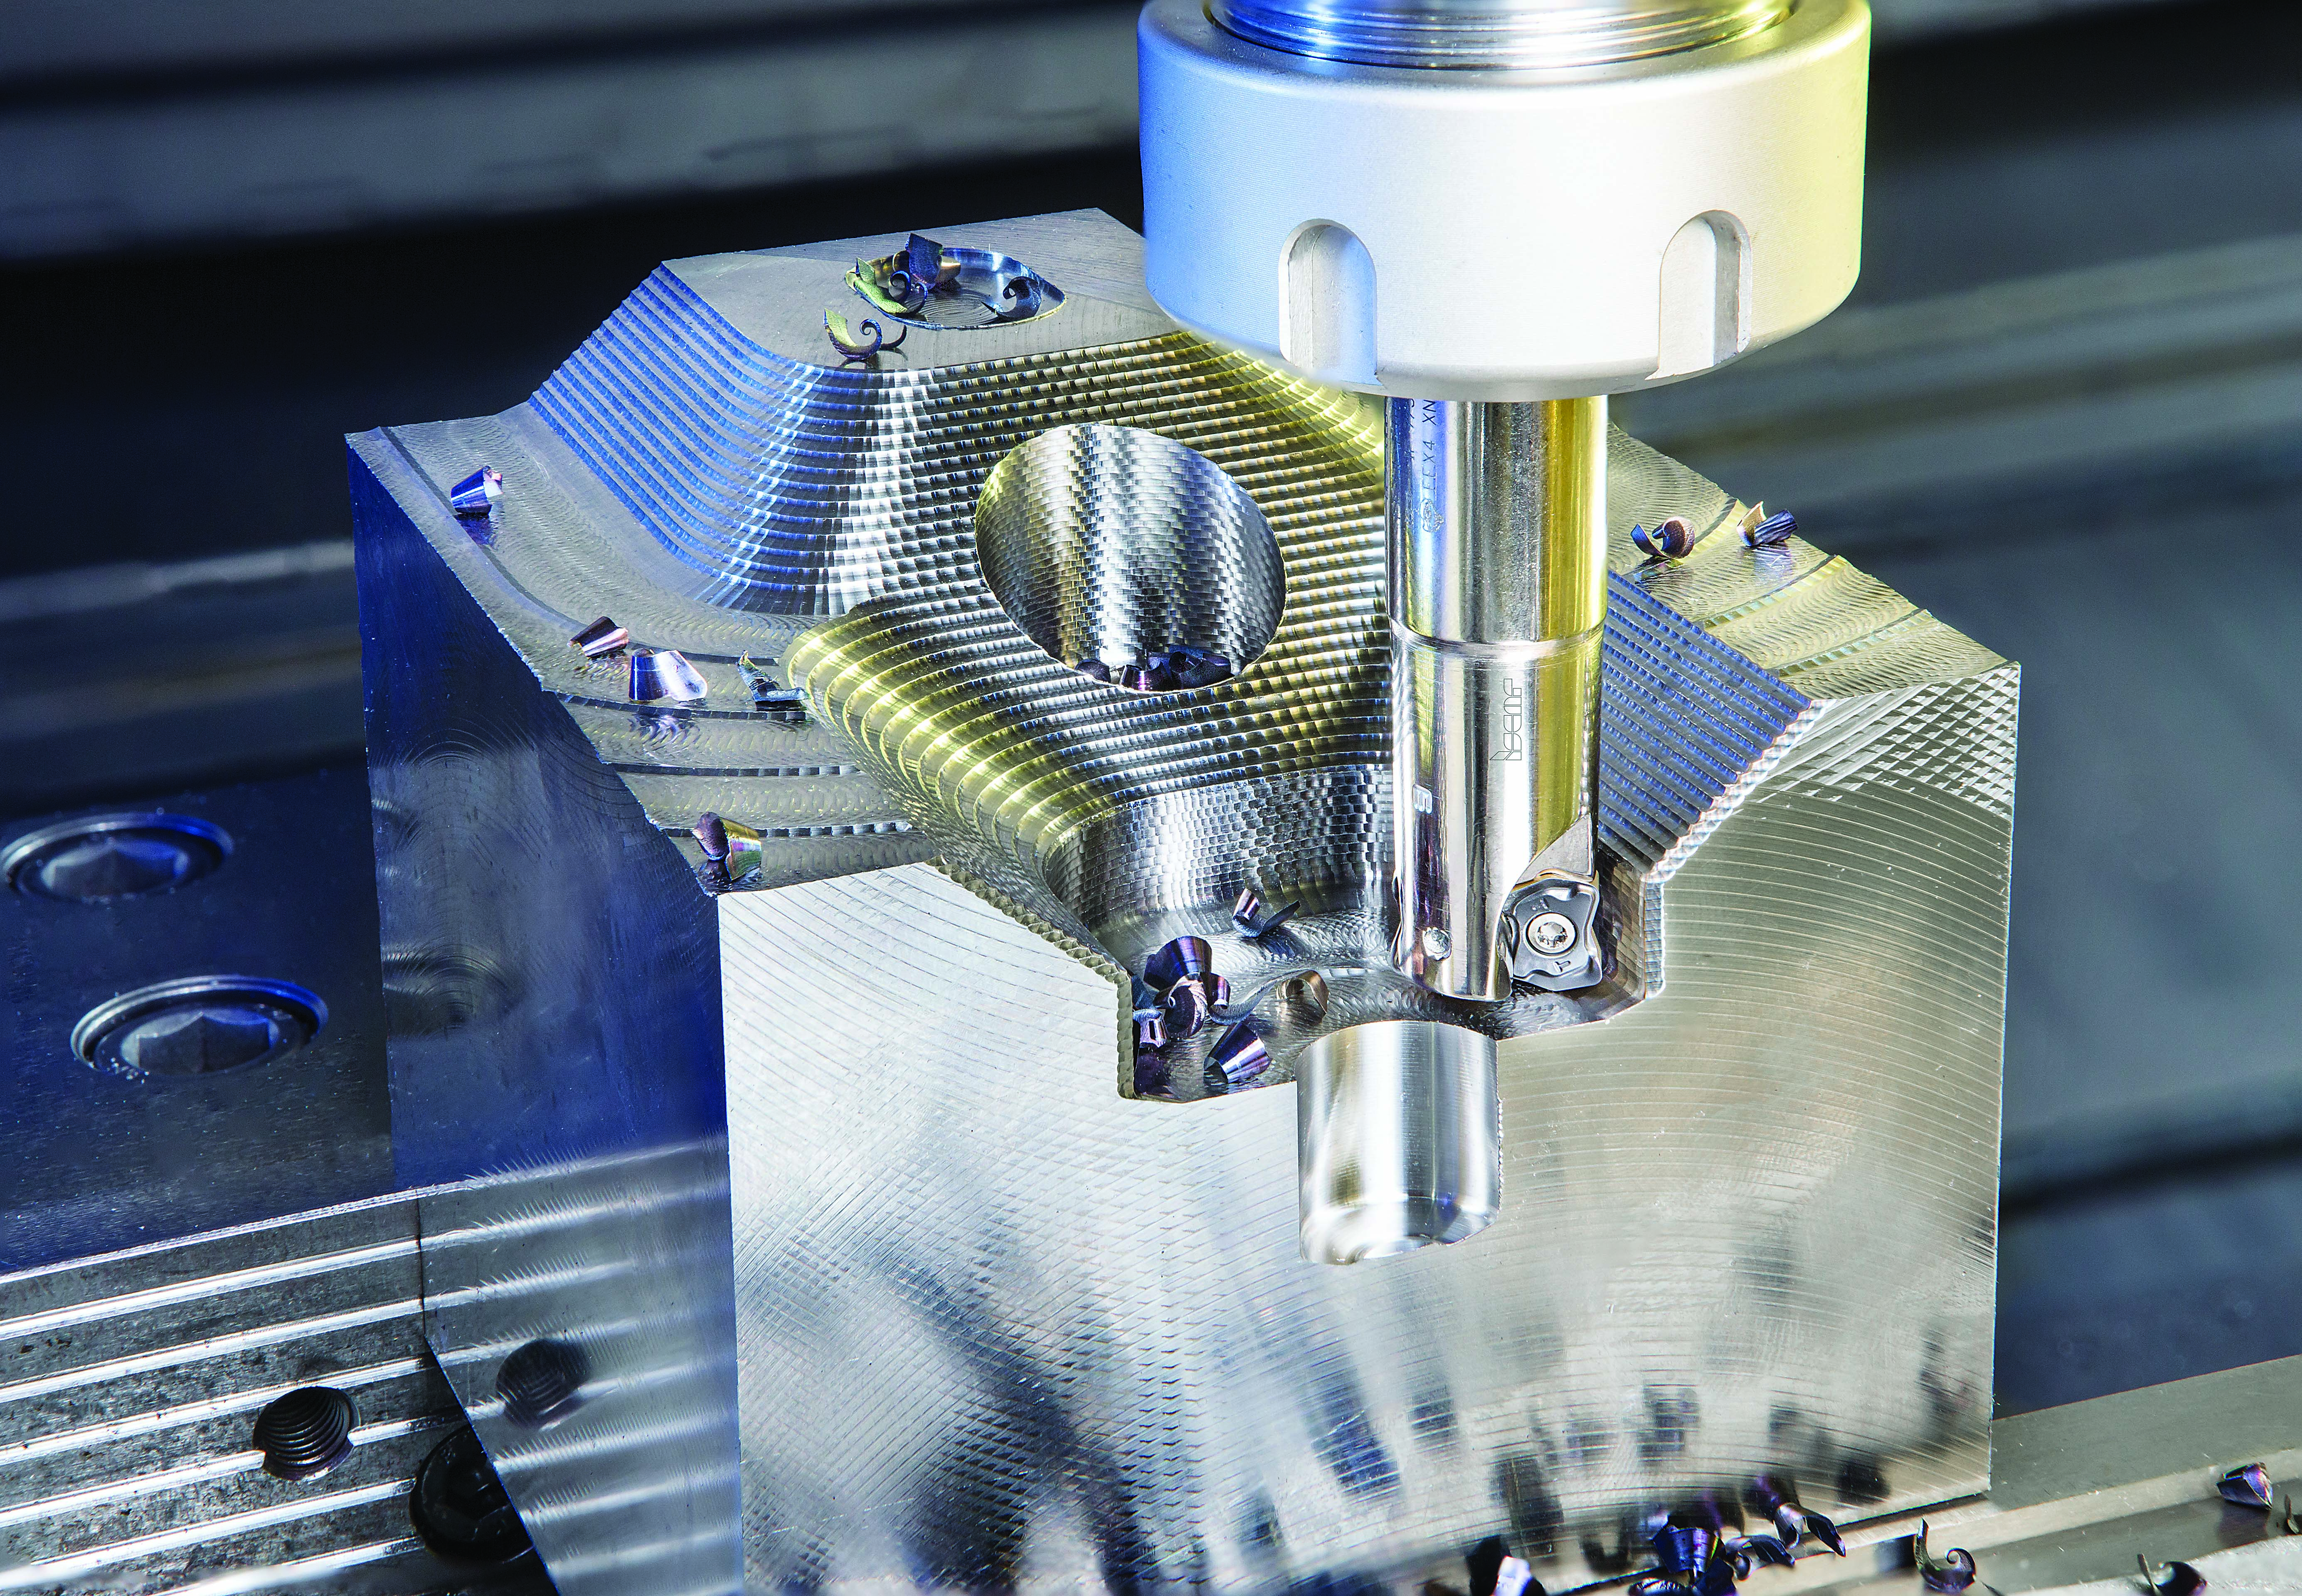 FFX4 ED endmills carry small, double-sided, “bone-shaped” inserts with four cutting edges for fast feed milling.